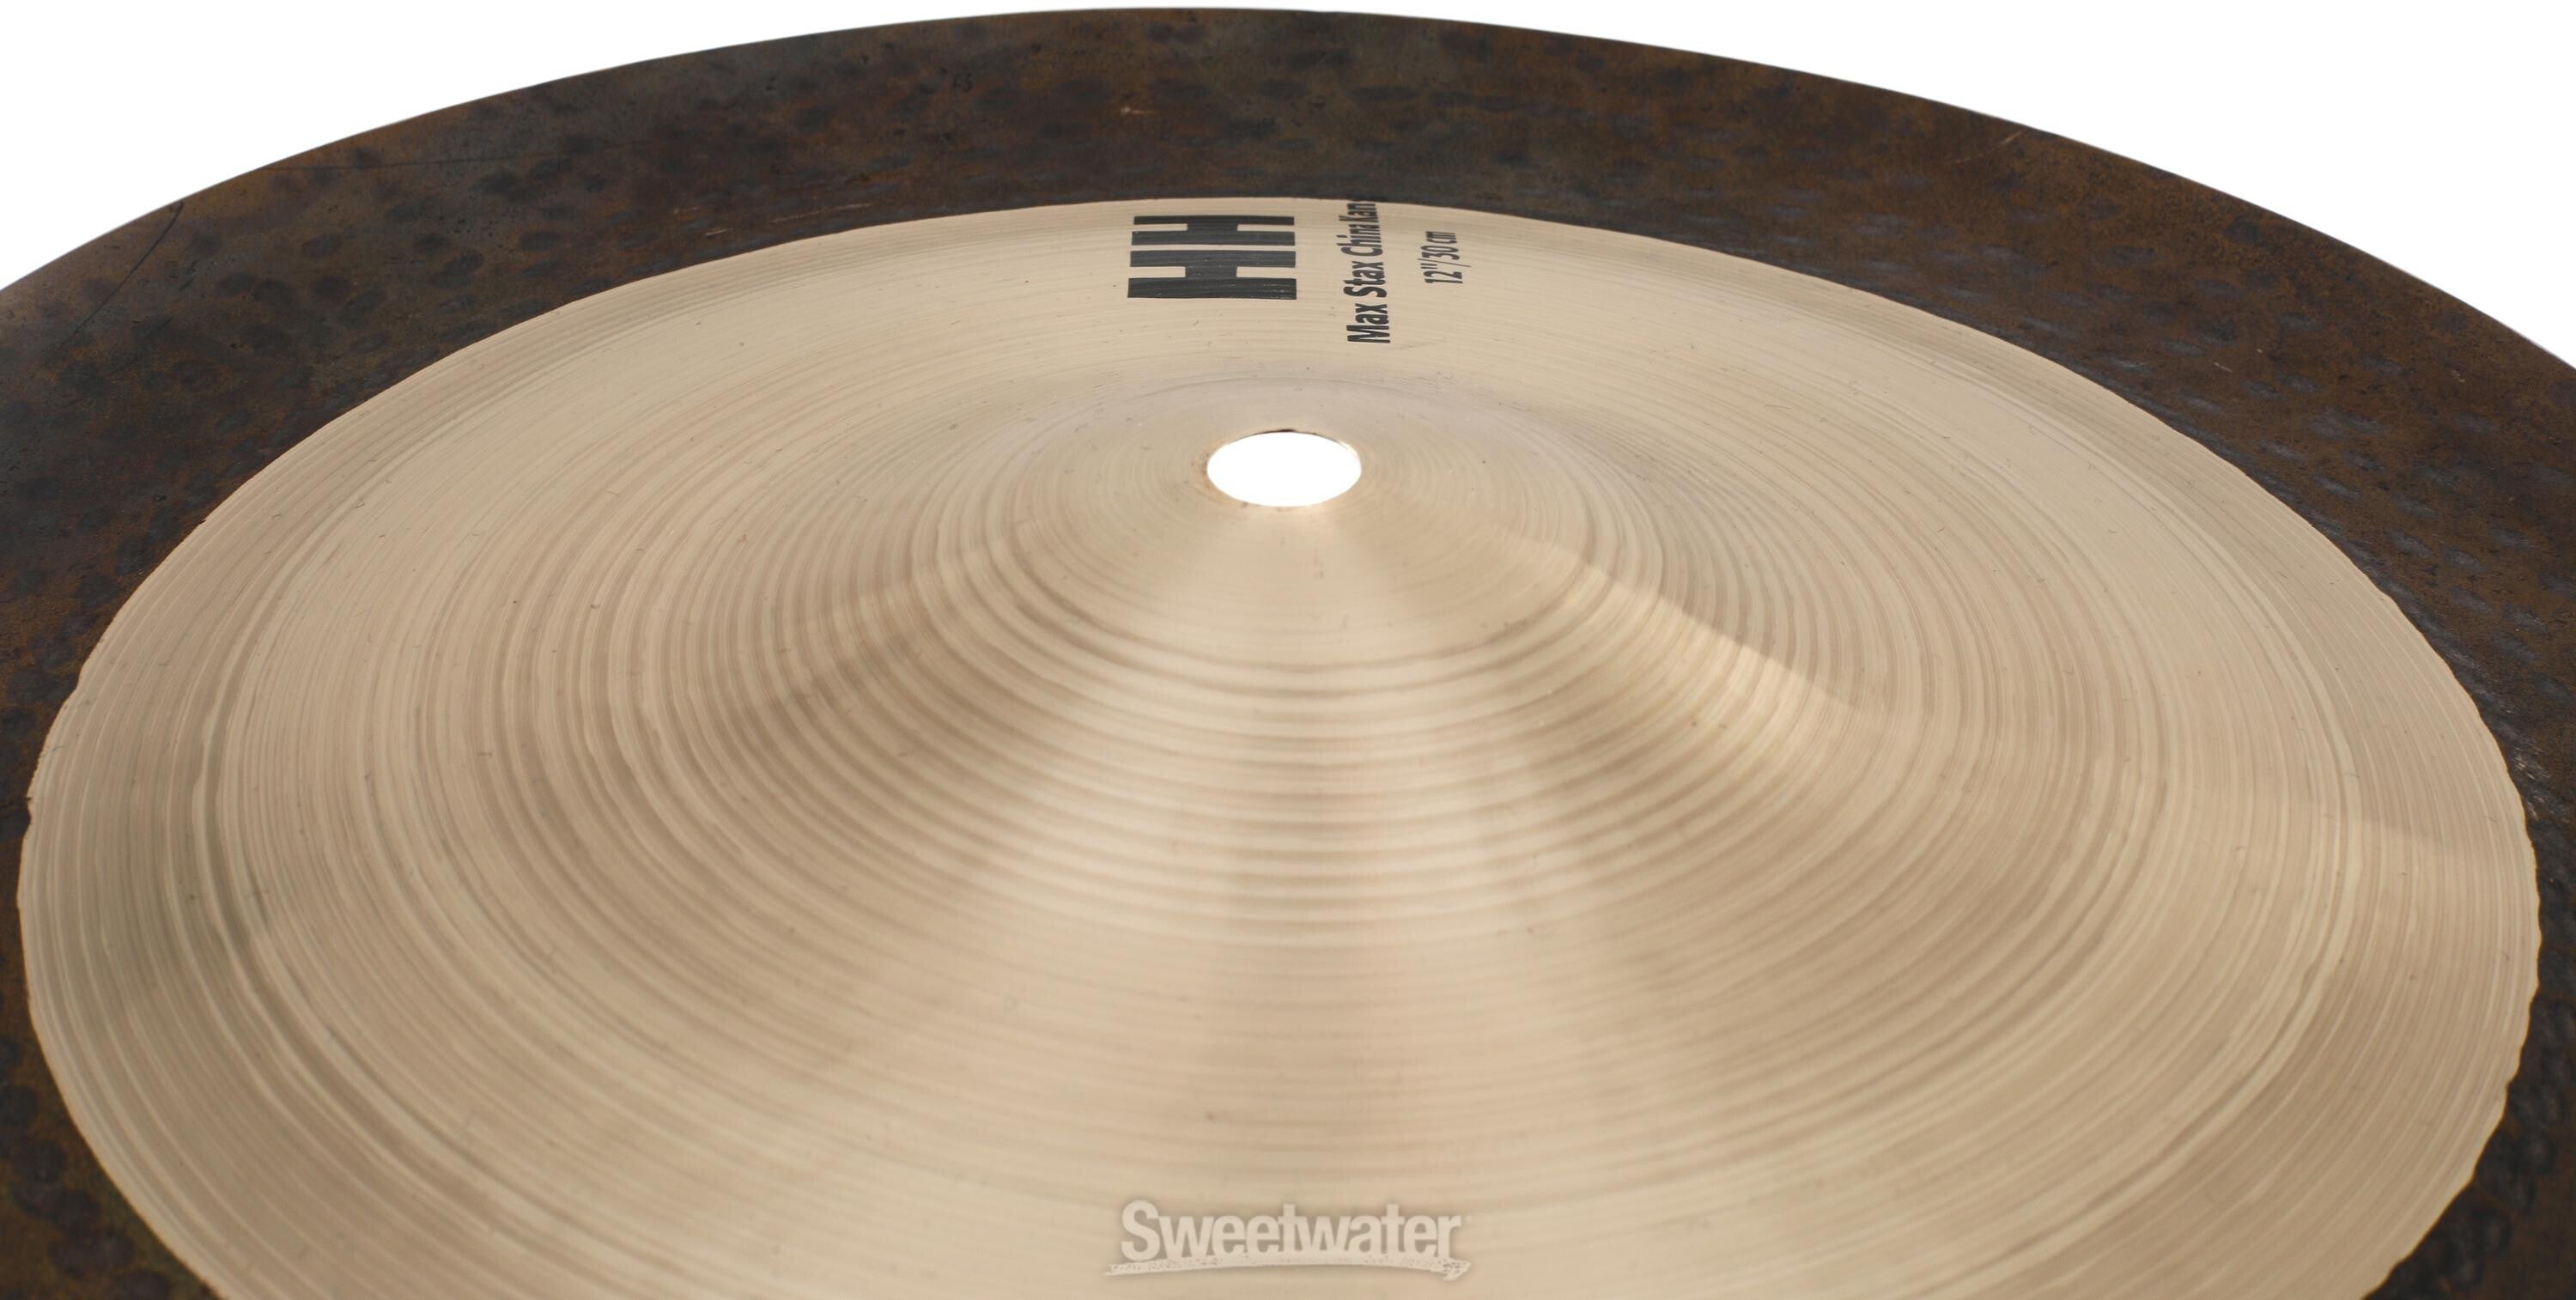 Sabian 14-inch HH Low Max Stax Cymbals | Sweetwater